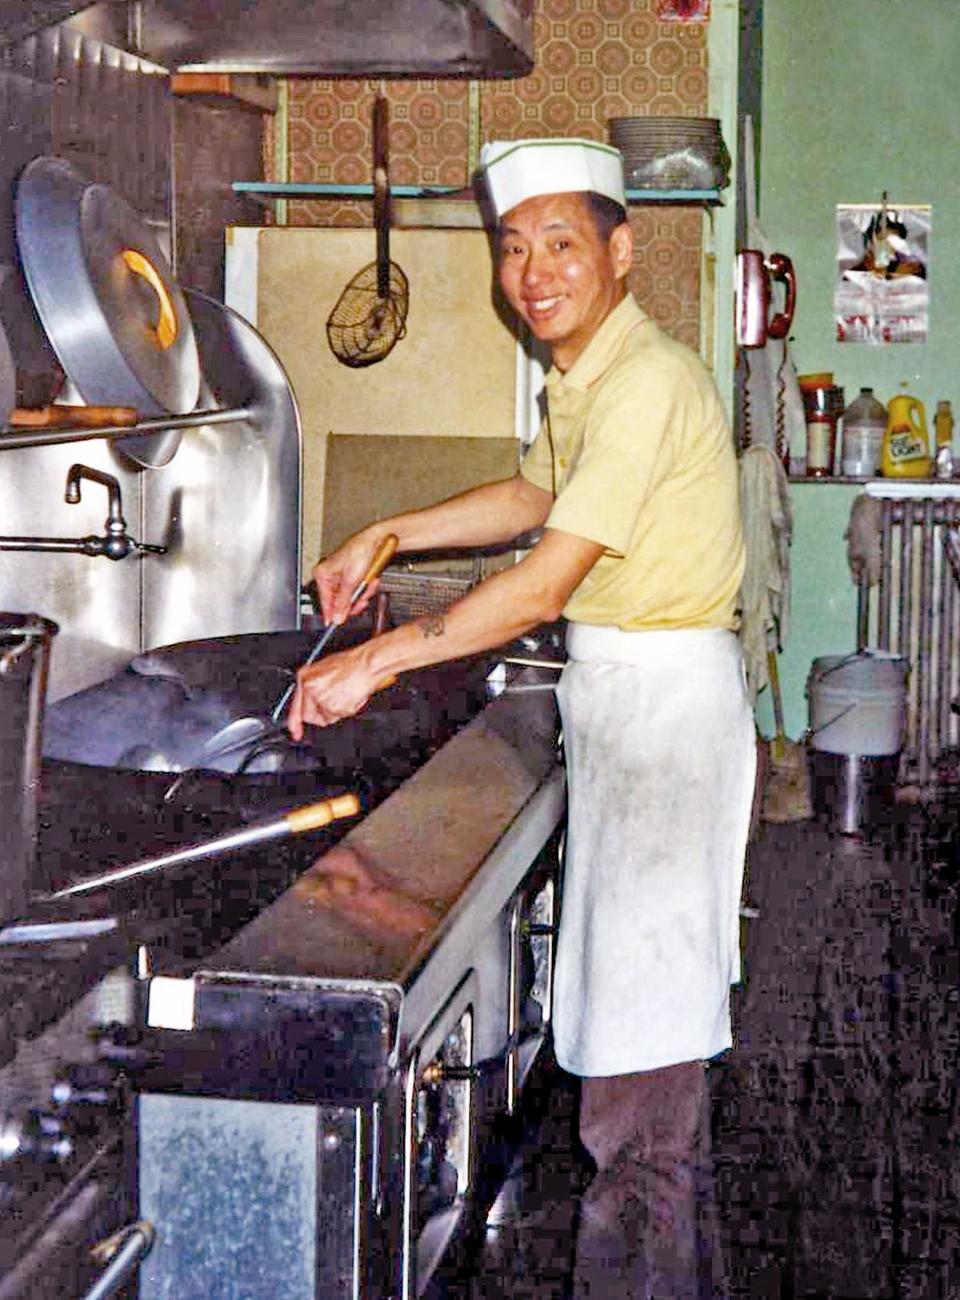 Mabel’s parents owned and operated Chopsticks Restaurant at 5414 W. Center St. in Milwaukee from 1984 to 1994. Her dad, Fung (Tony) Wong, is shown here in the restaurant’s kitchen.